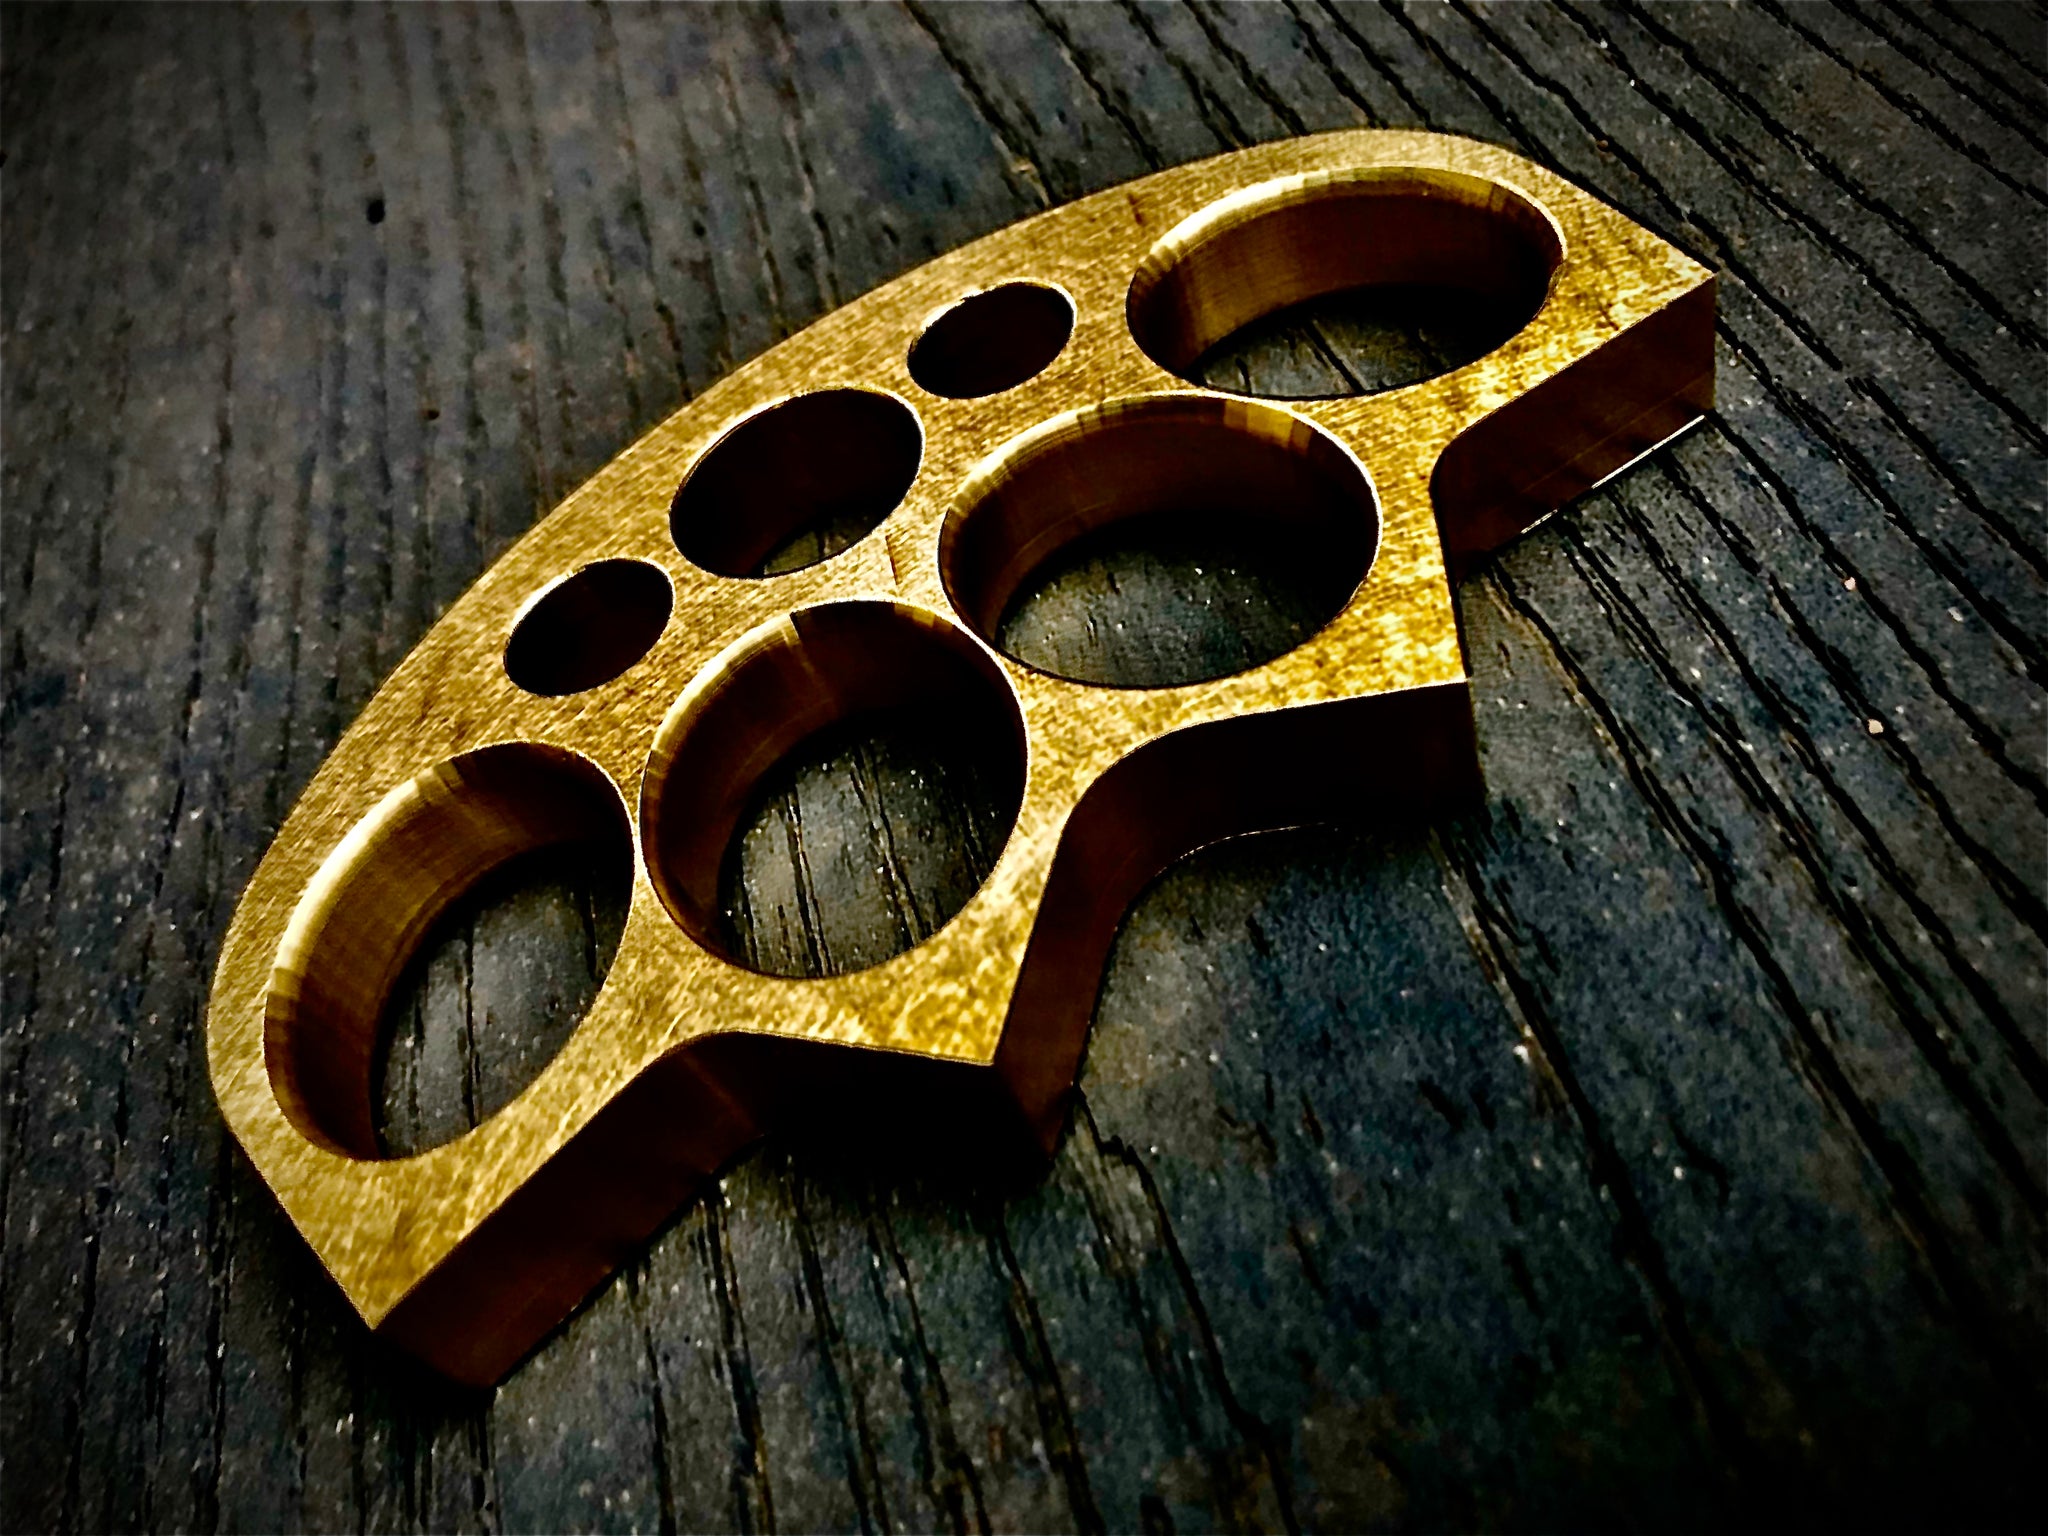 1/2” THICK FULL BRASS KNUCKLE CROWN – szaboinc